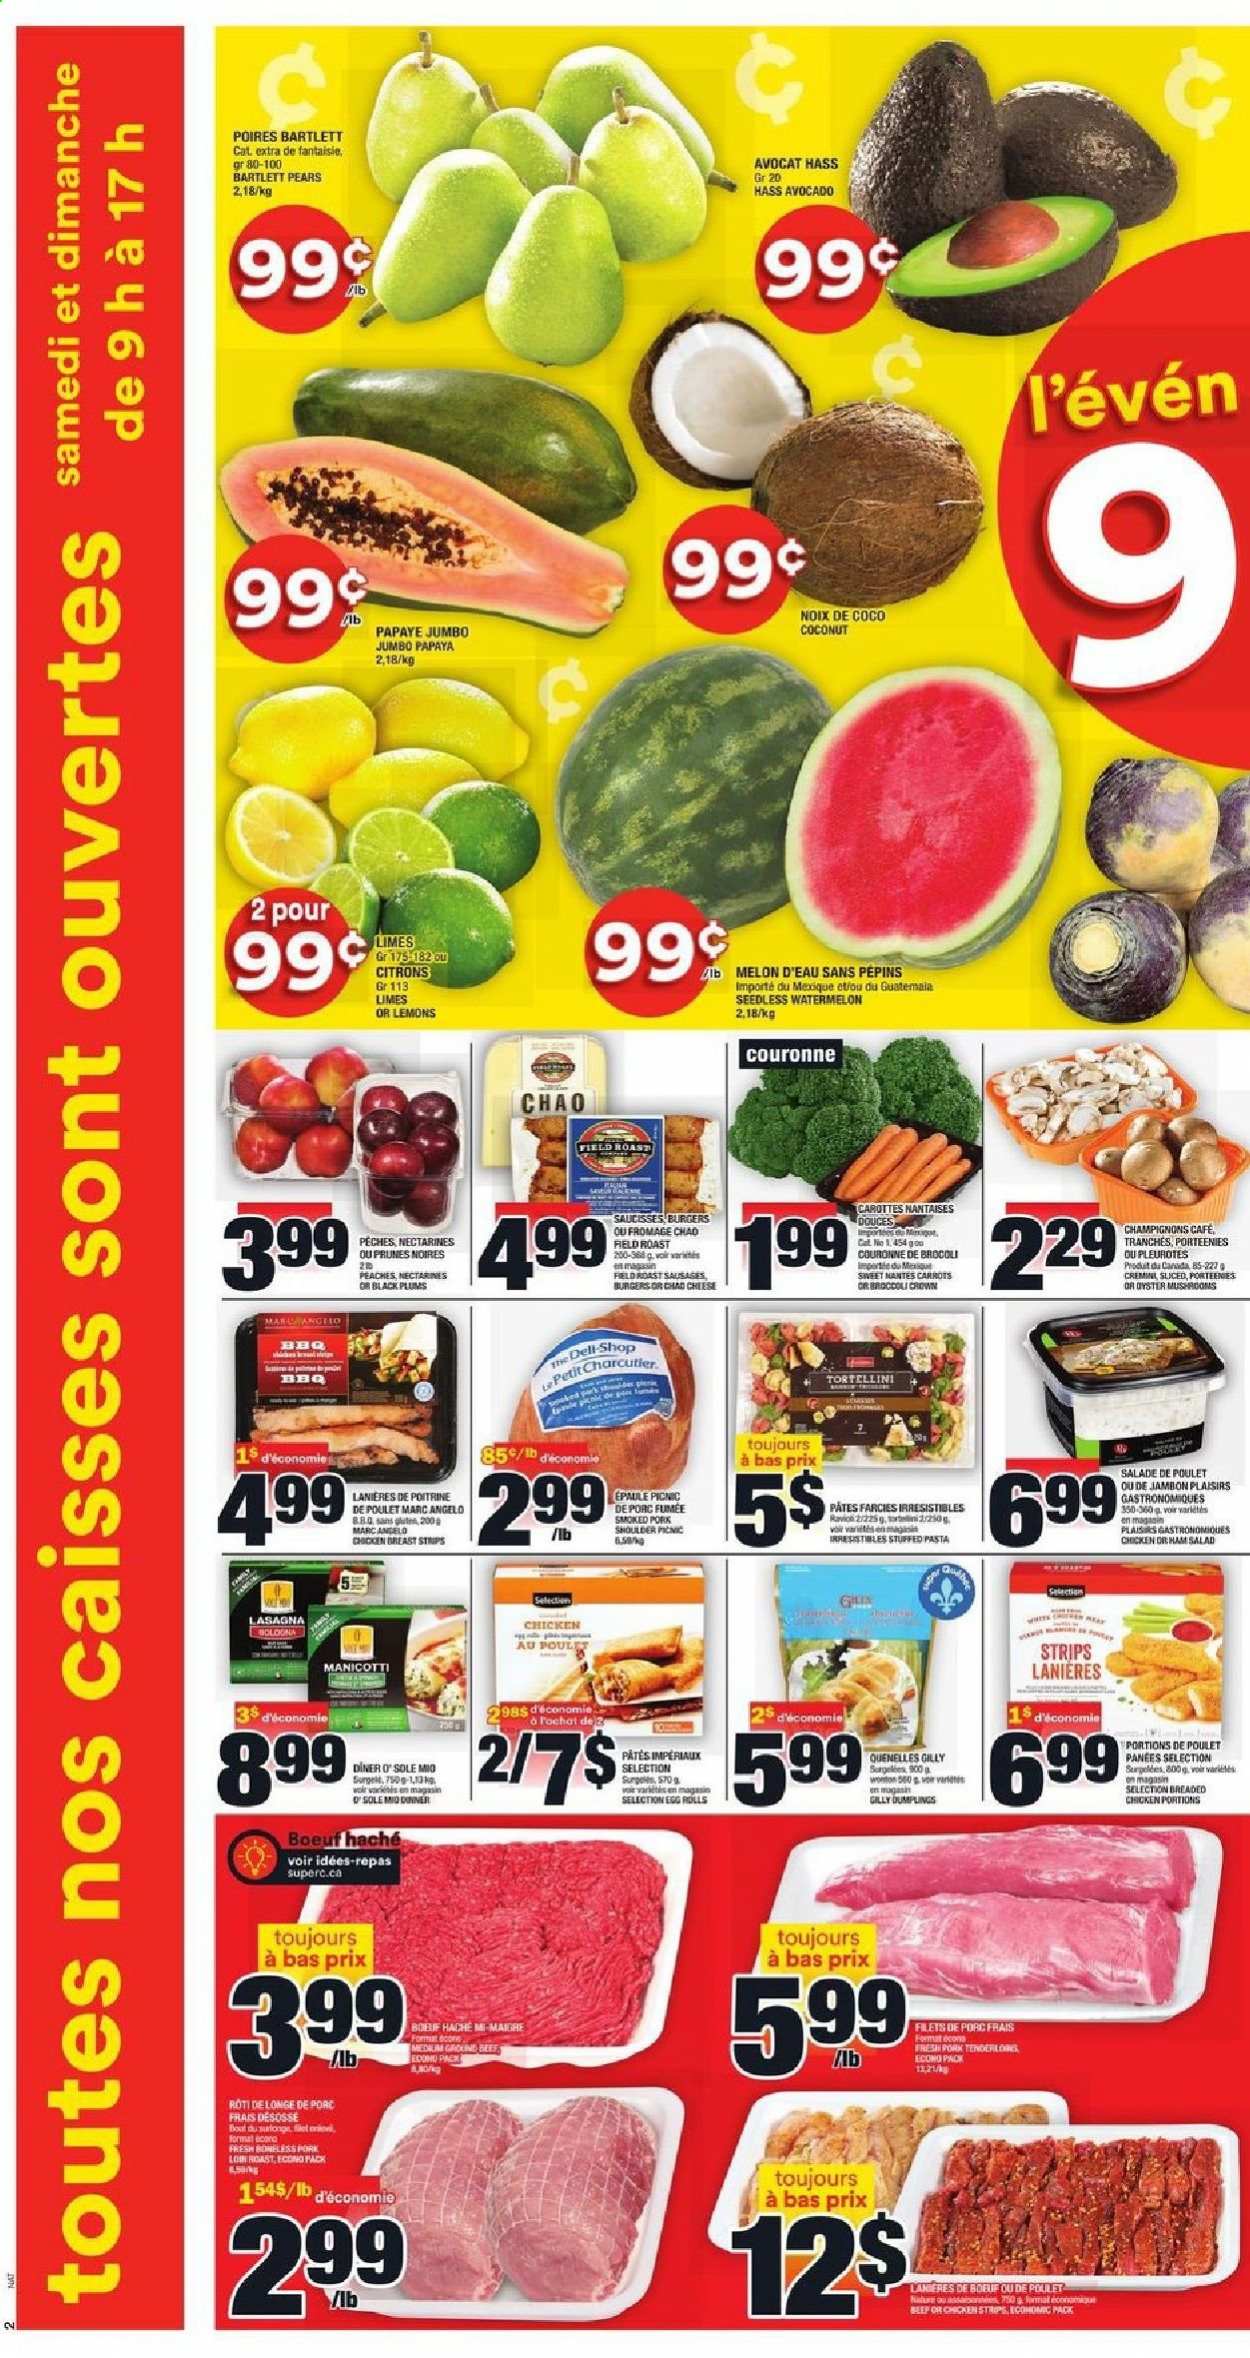 thumbnail - Super C Flyer - March 11, 2021 - March 17, 2021 - Sales products - carrots, salad, avocado, Bartlett pears, limes, nectarines, watermelon, plums, papaya, pears, coconut, melons, lemons, black plums, peaches, oysters, ravioli, hamburger, pasta, tortellini, egg rolls, fried chicken, dumplings, lasagna meal, bologna sausage, sausage, cheese, strips, prunes, dried fruit, pork meat, pork shoulder. Page 3.